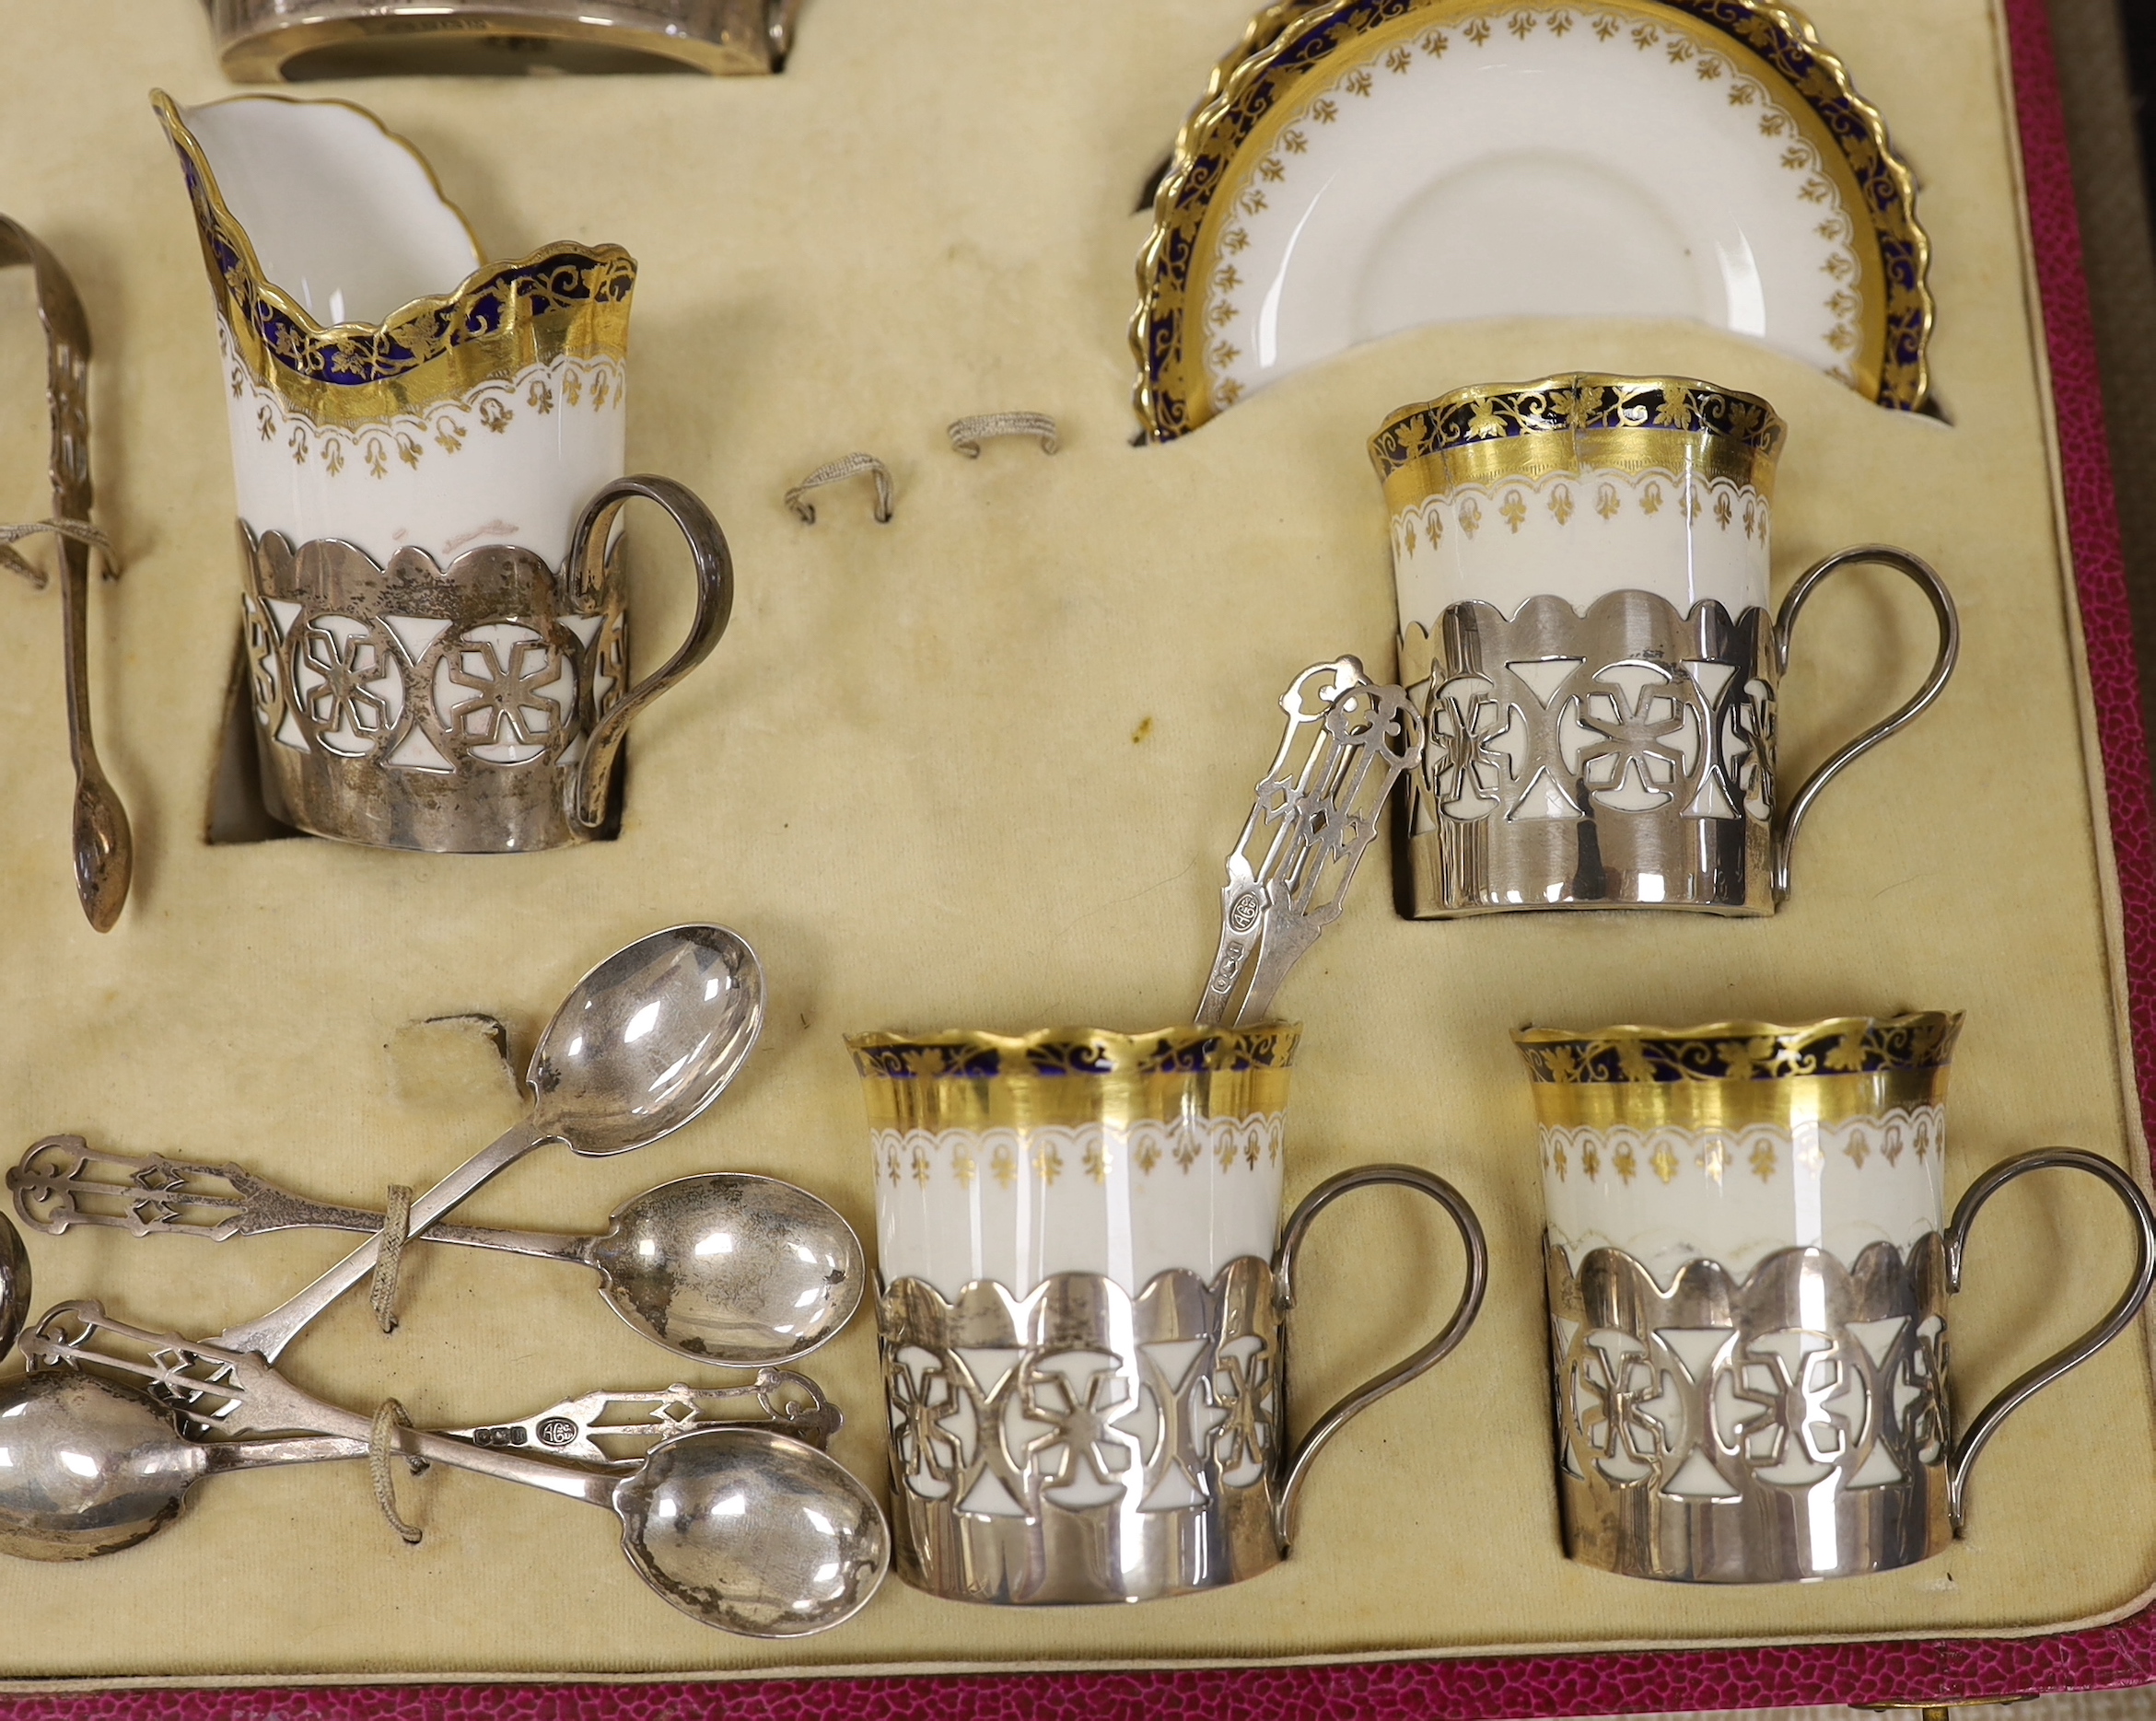 A cased George Jones Crescent China silver mounted coffee set, marks for Alexander Clark Co Ltd Sheffield 1928